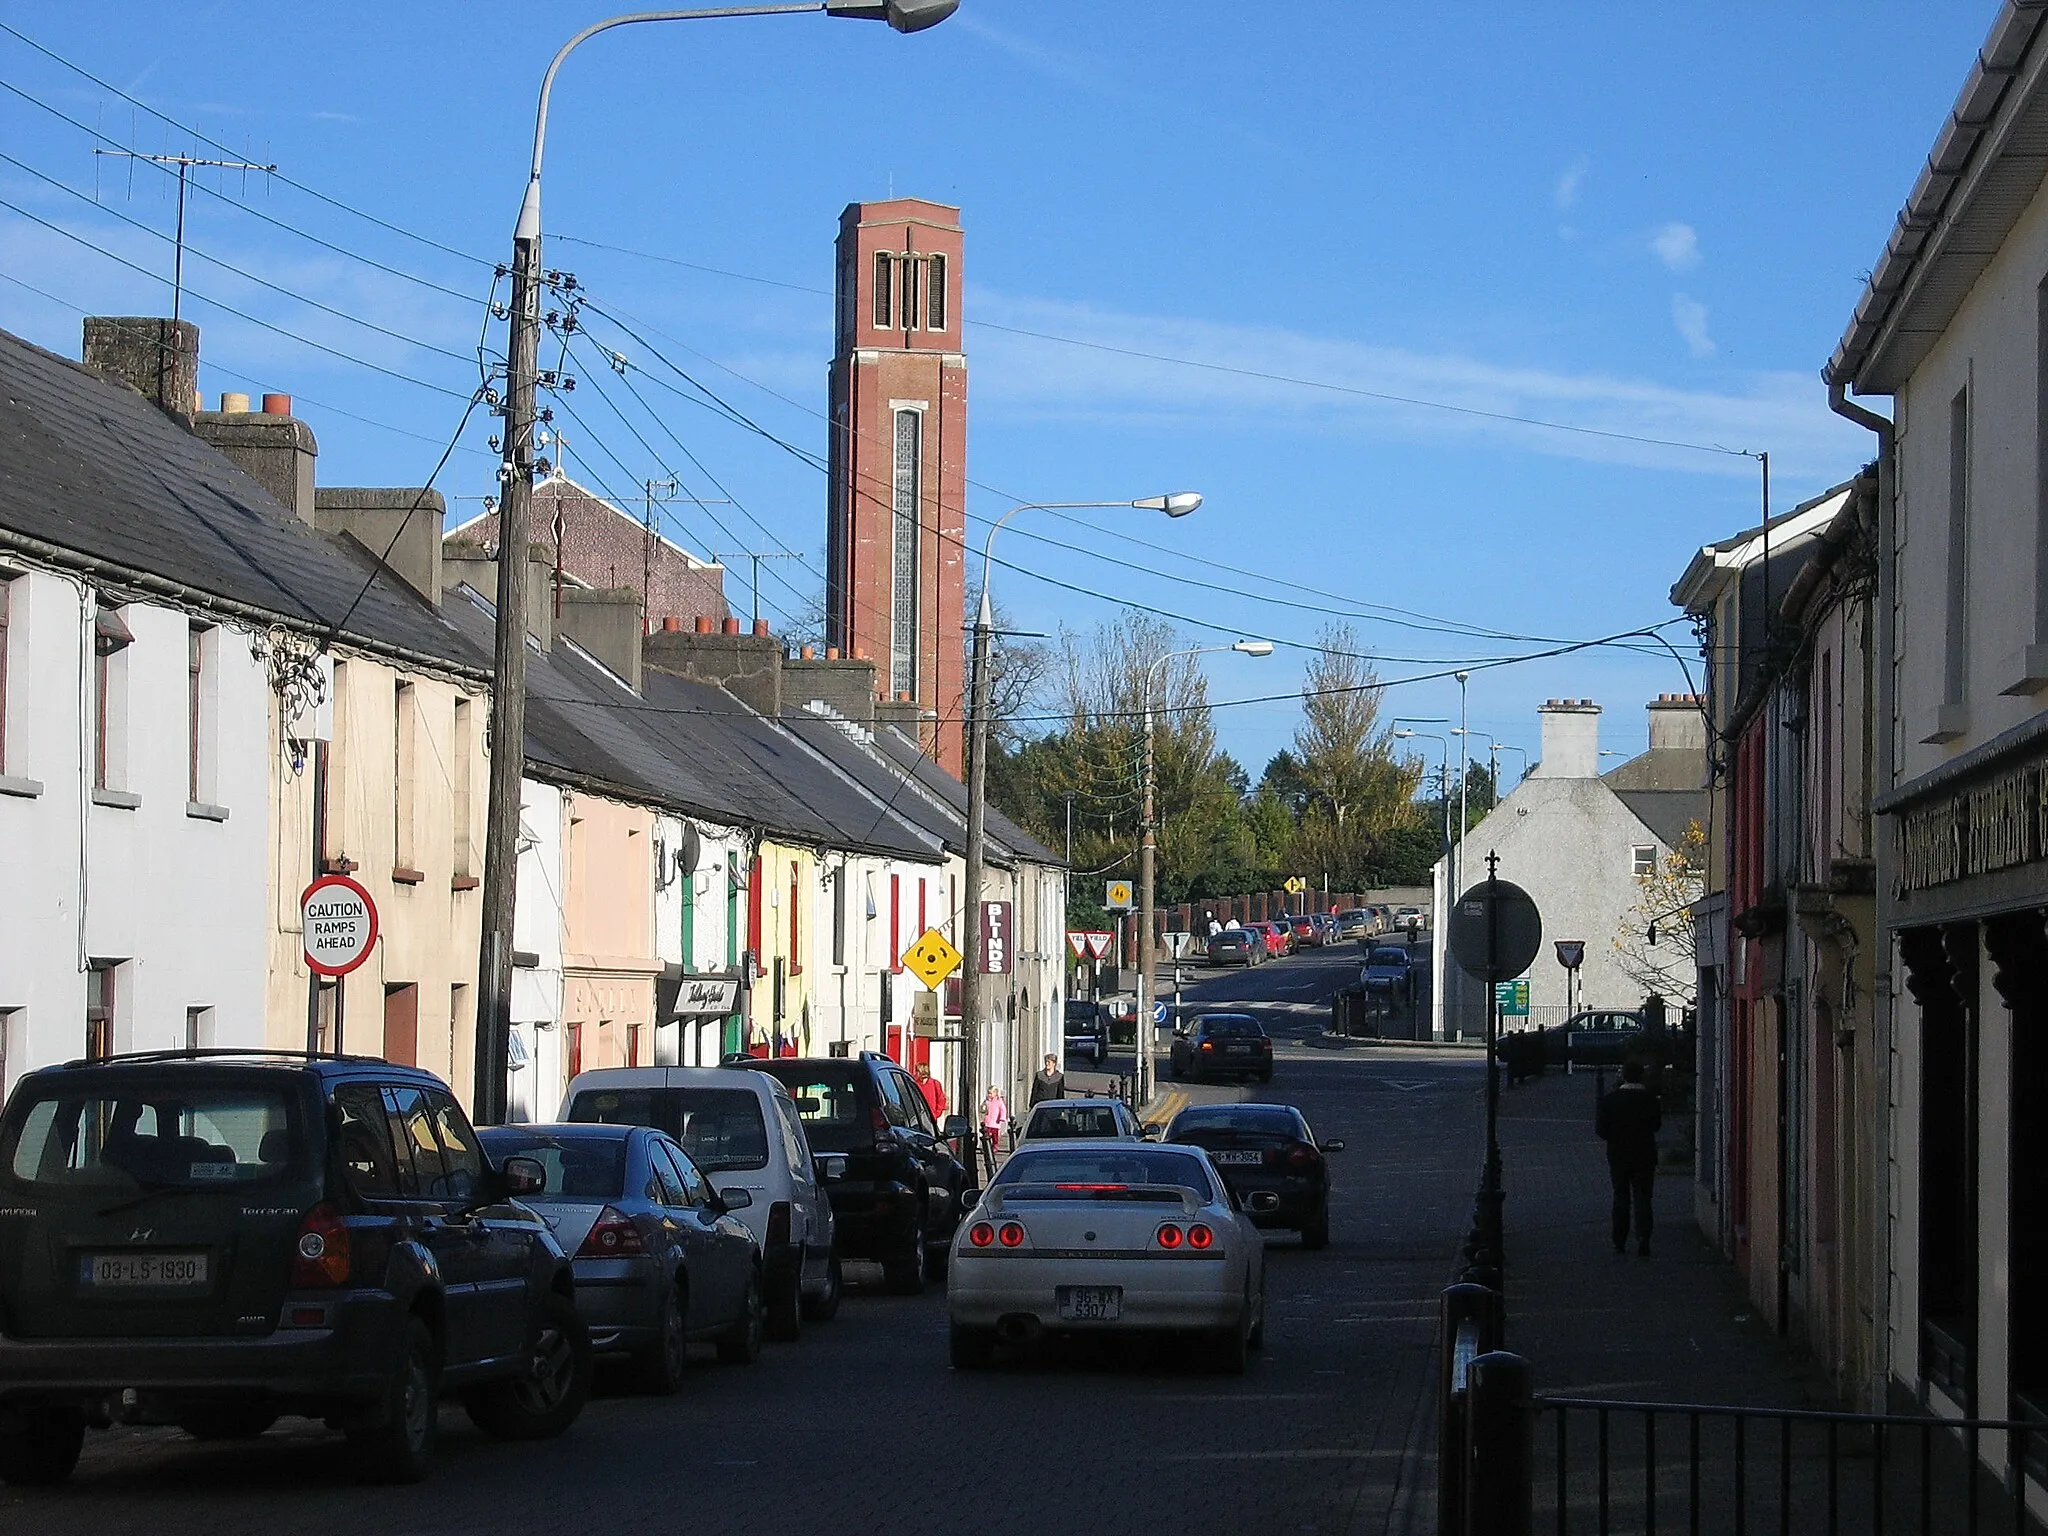 Photo showing: Bridge Street in Portlaoise, looking east with the Roman Catholic Parish Church of SS. Peter and Paul in the background.